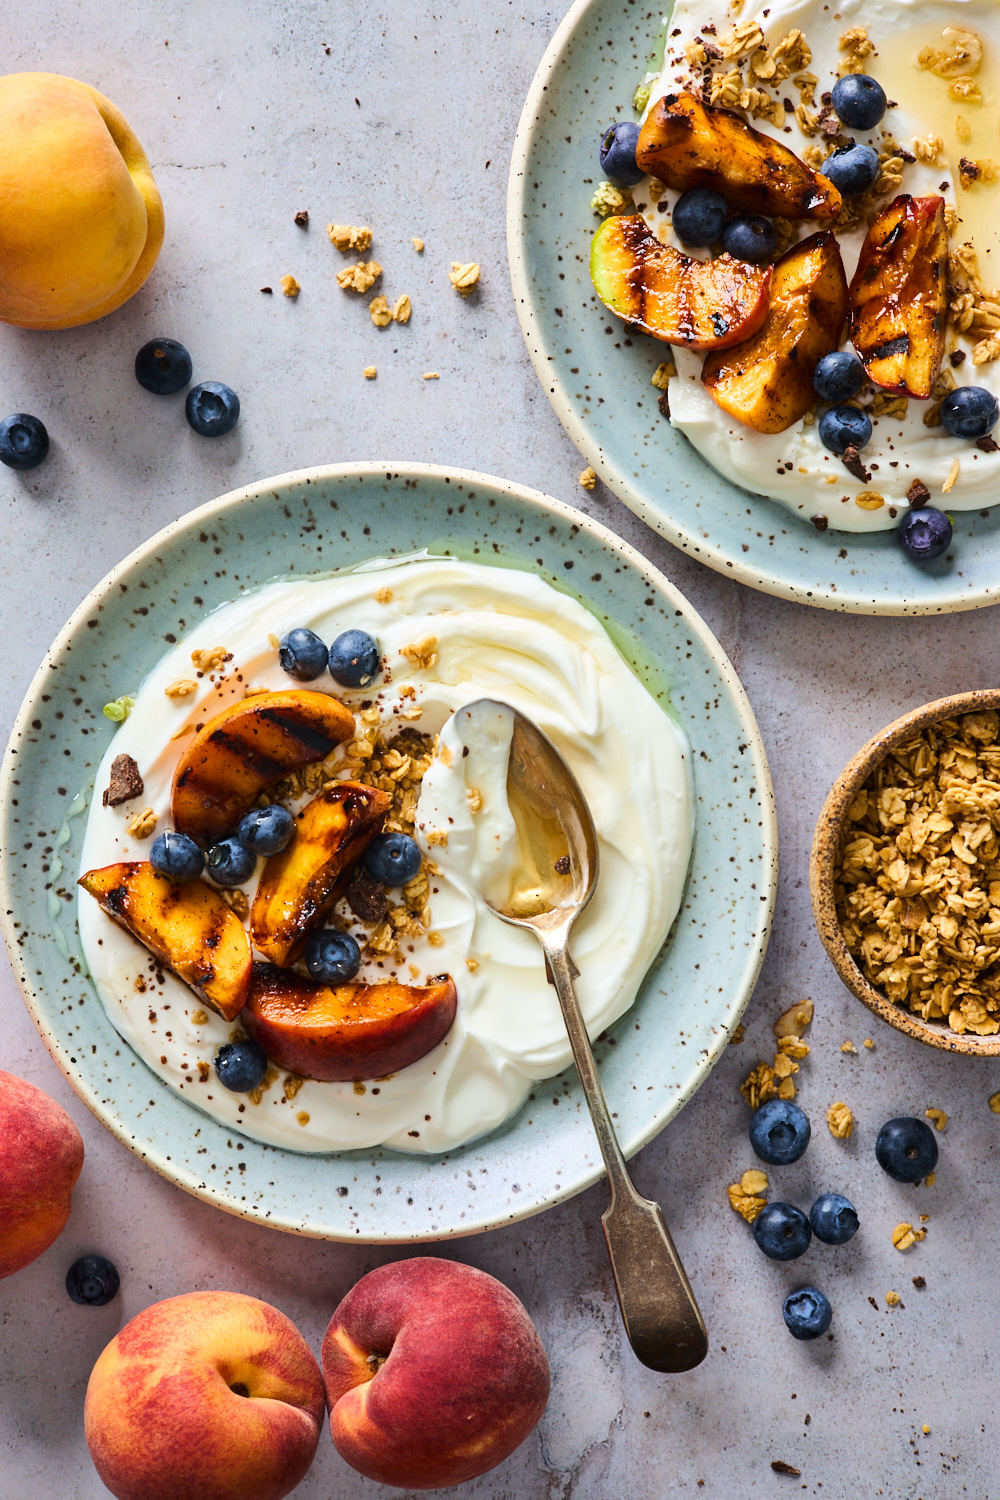 Grilled Peach and Blueberry Yoghurt Parfaits